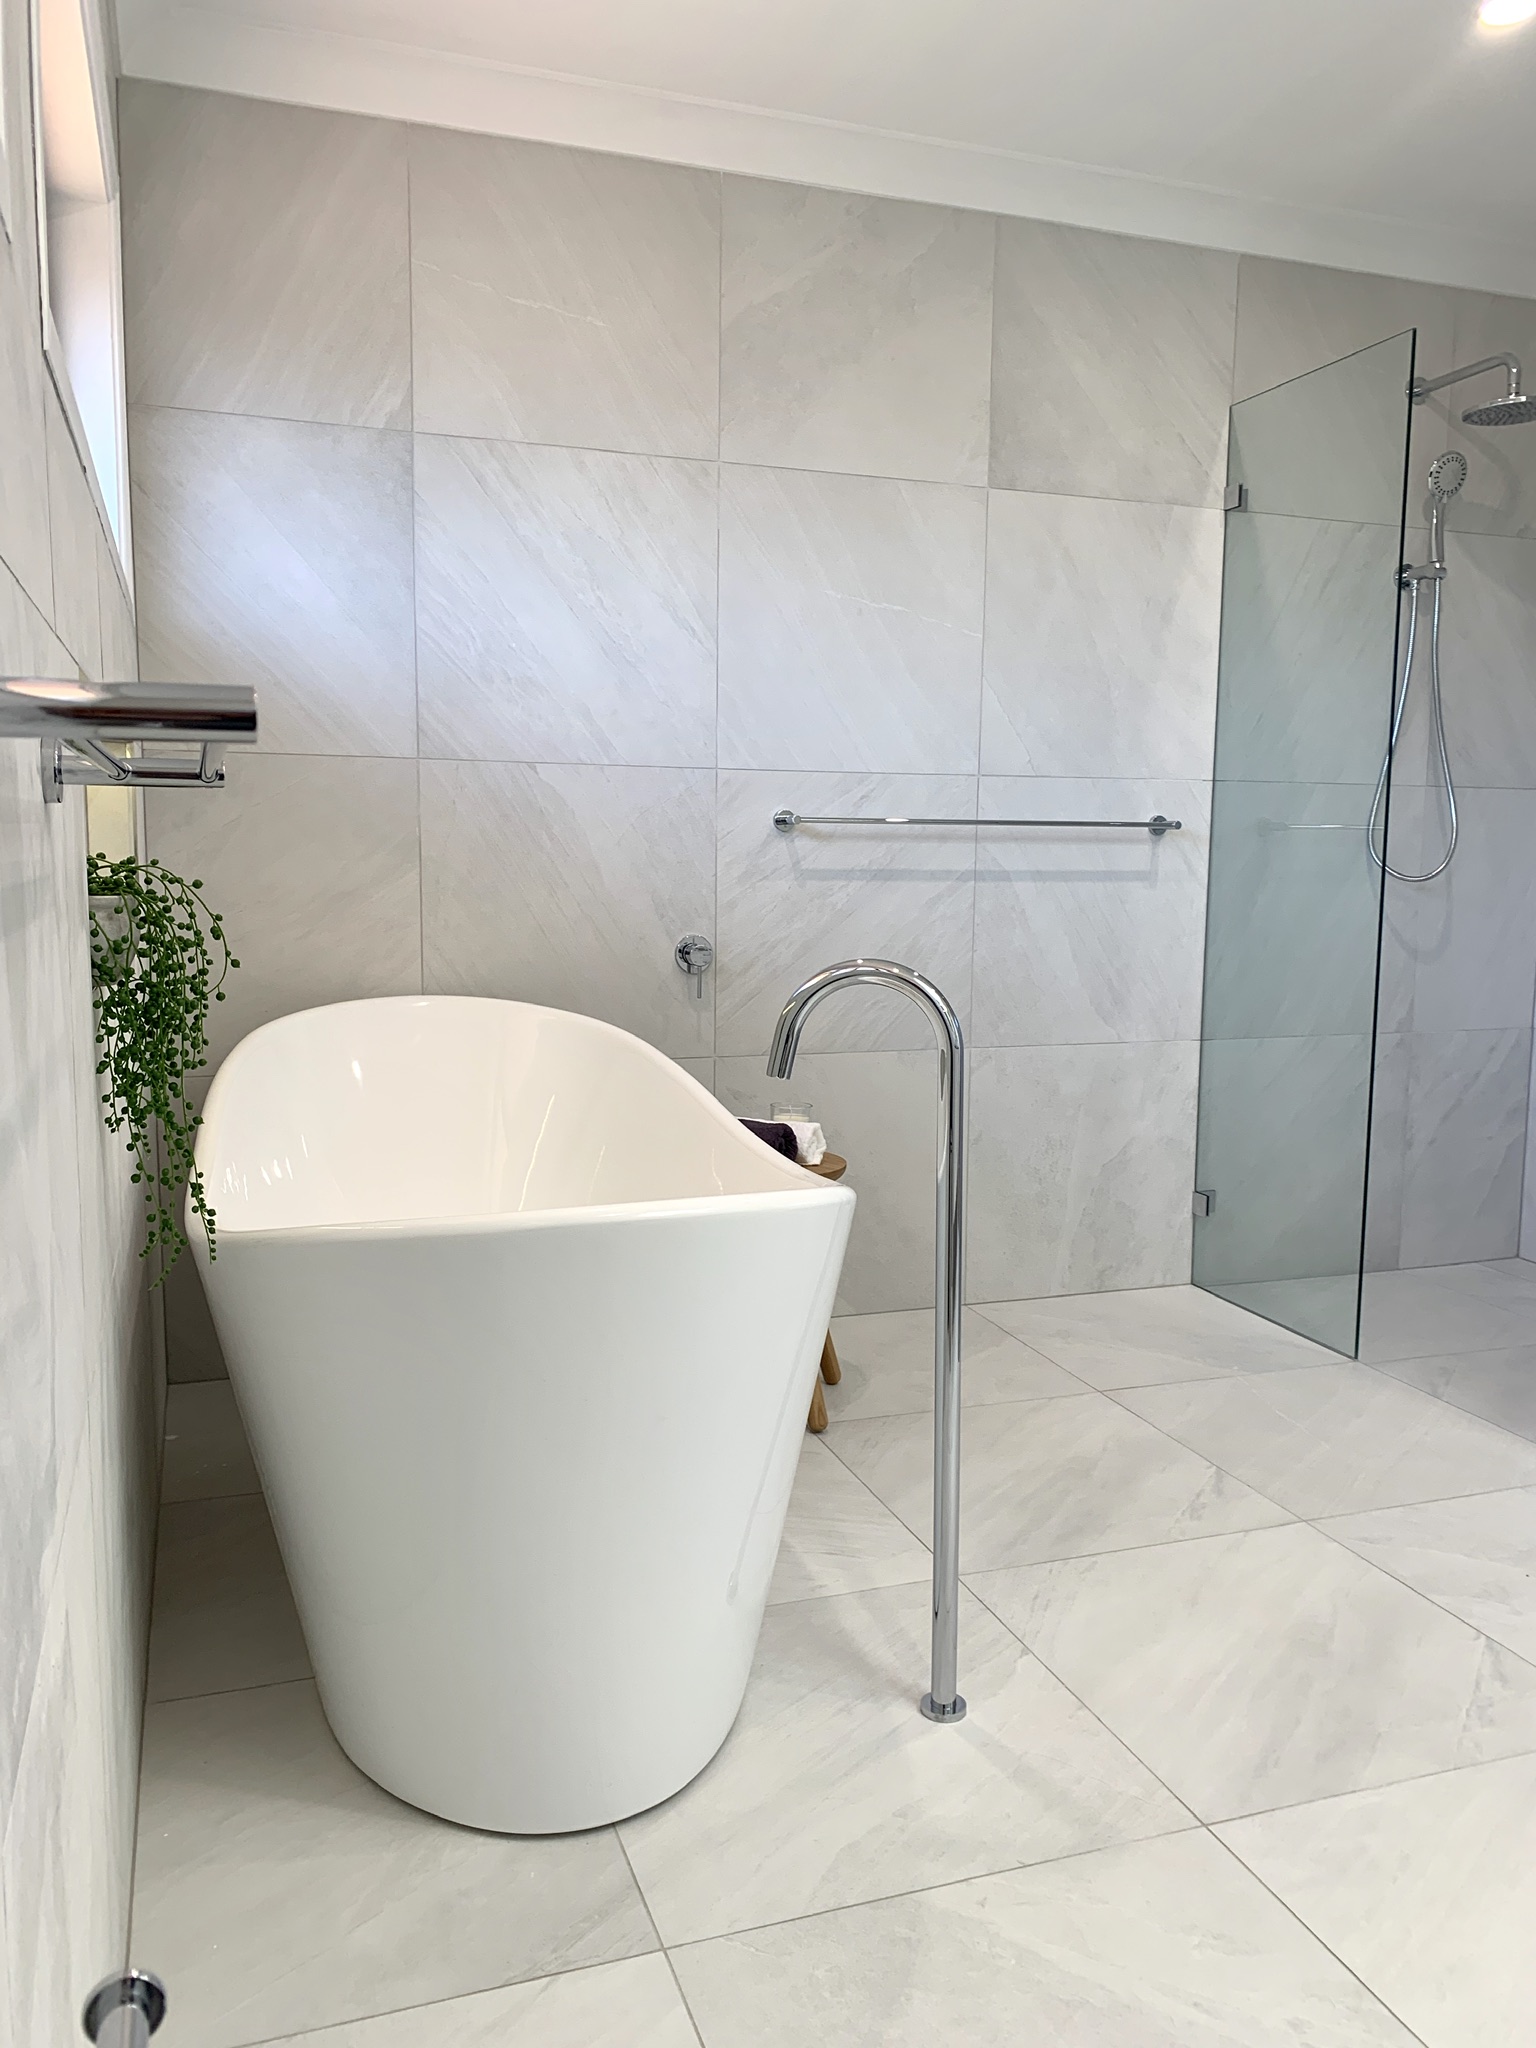 Difference Between Porcelain Ceramic Tile, Which Is Better In A Bathroom Porcelain Or Ceramic Tile